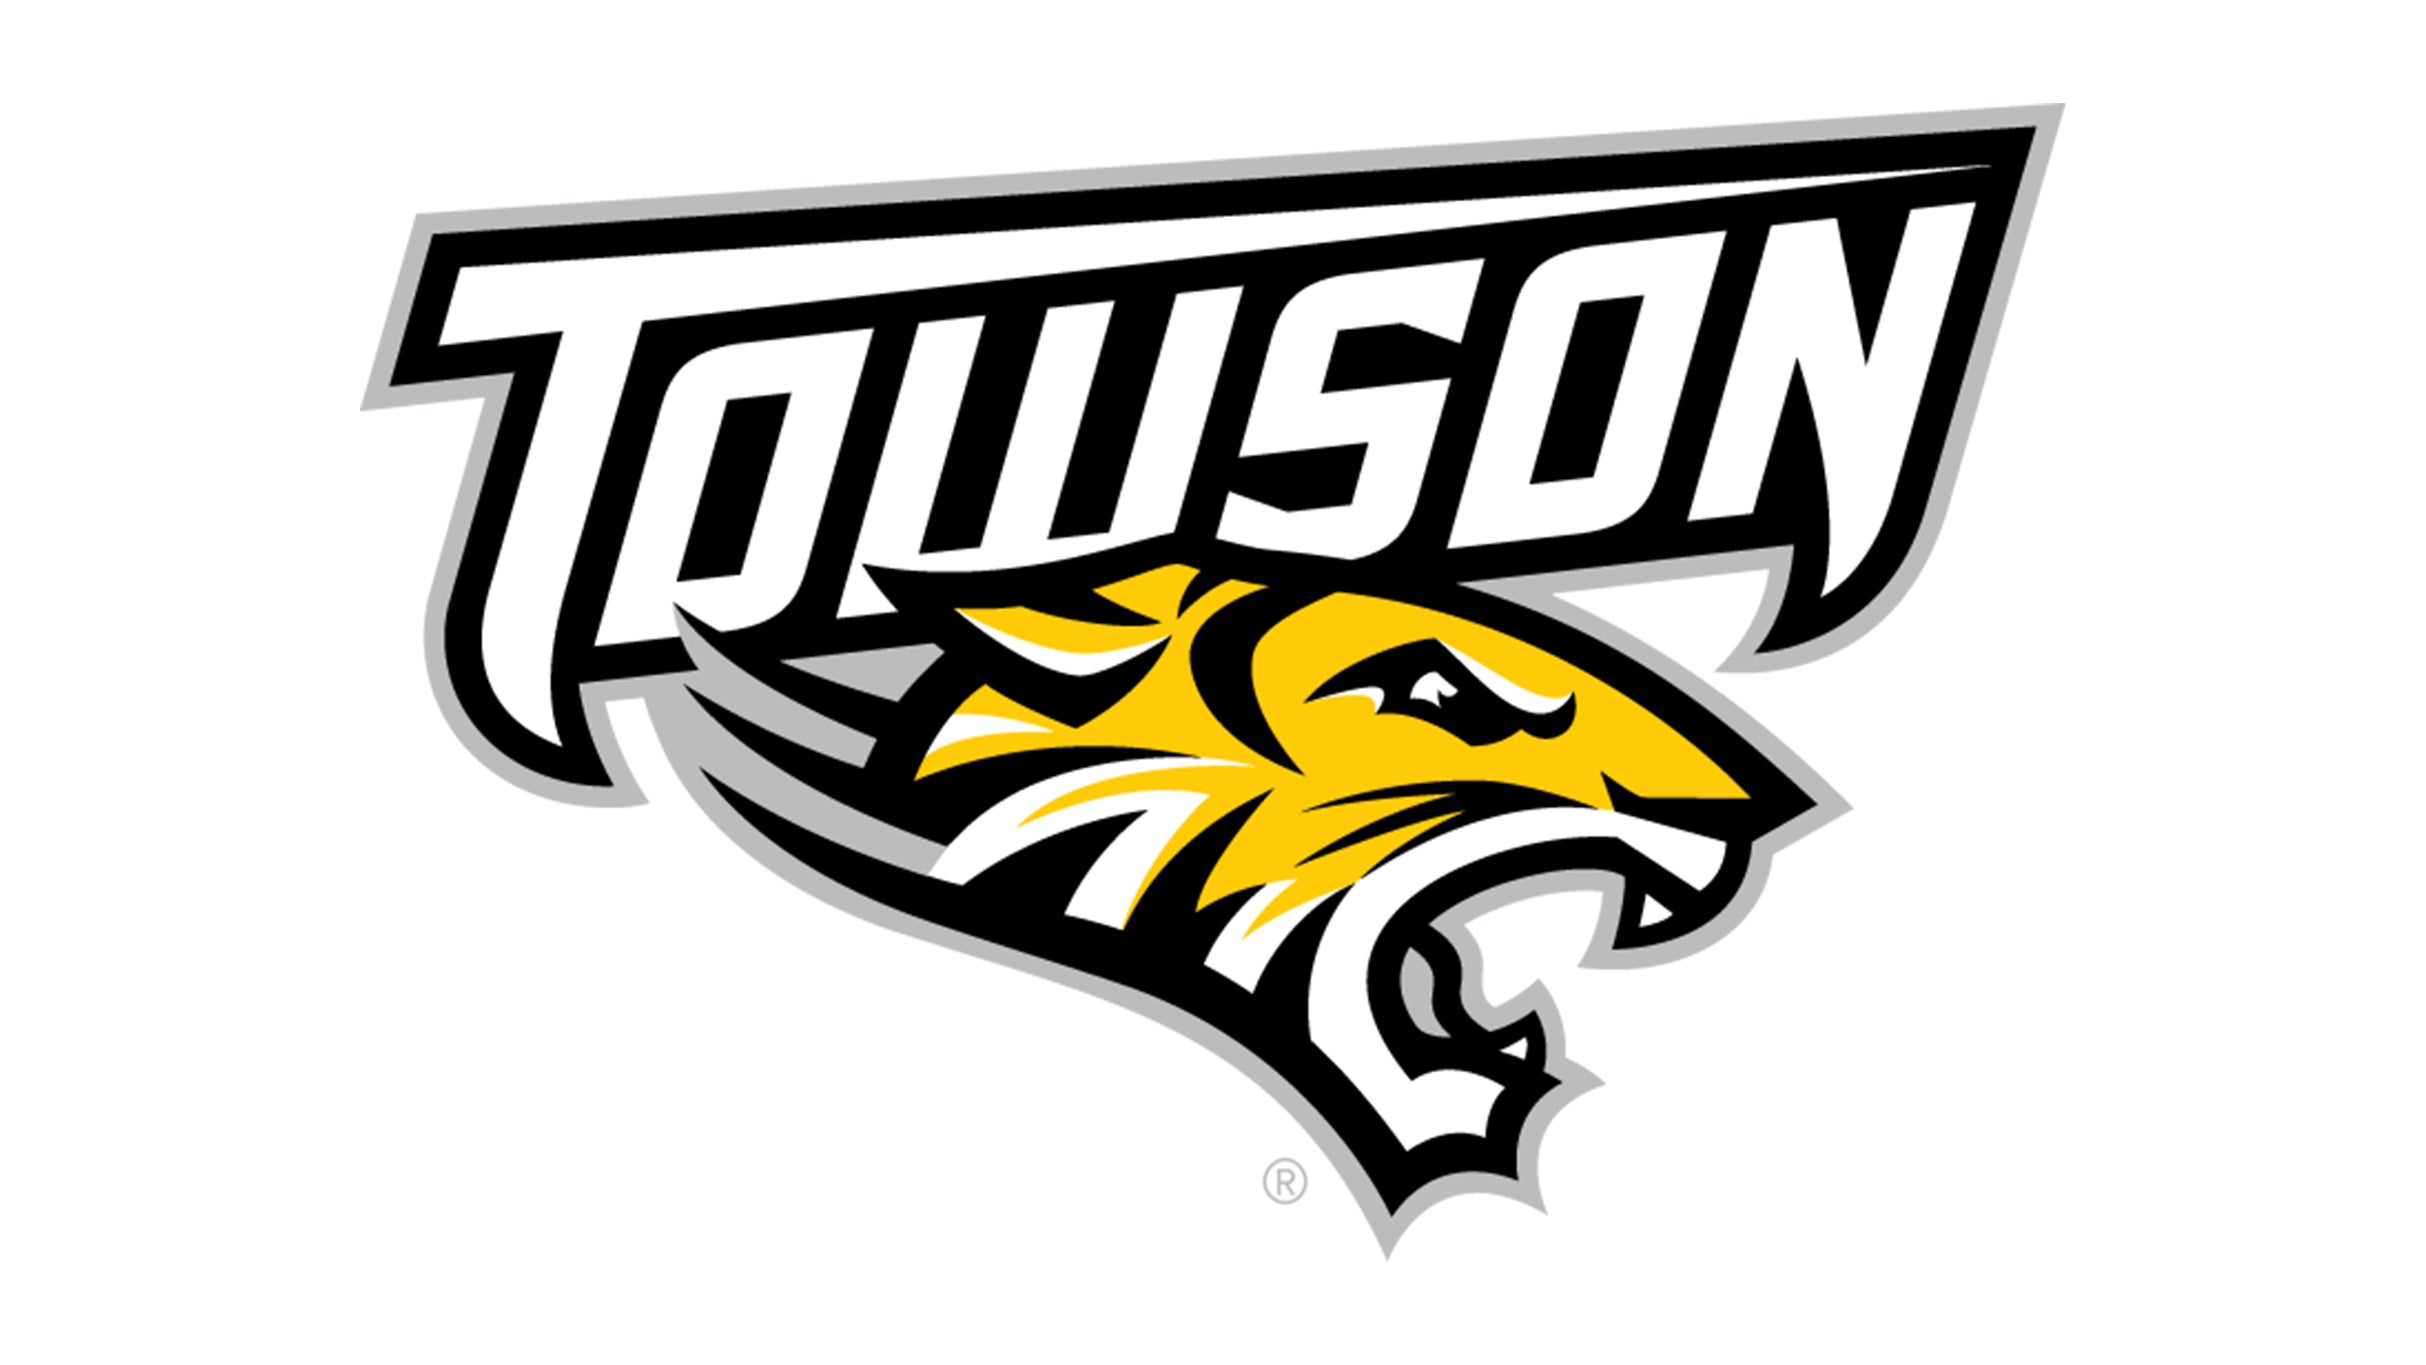 Towson University Tigers Womens Basketball vs. Morgan State Bears Womens Basketball in Towson promo photo for $8 Ticket presale offer code